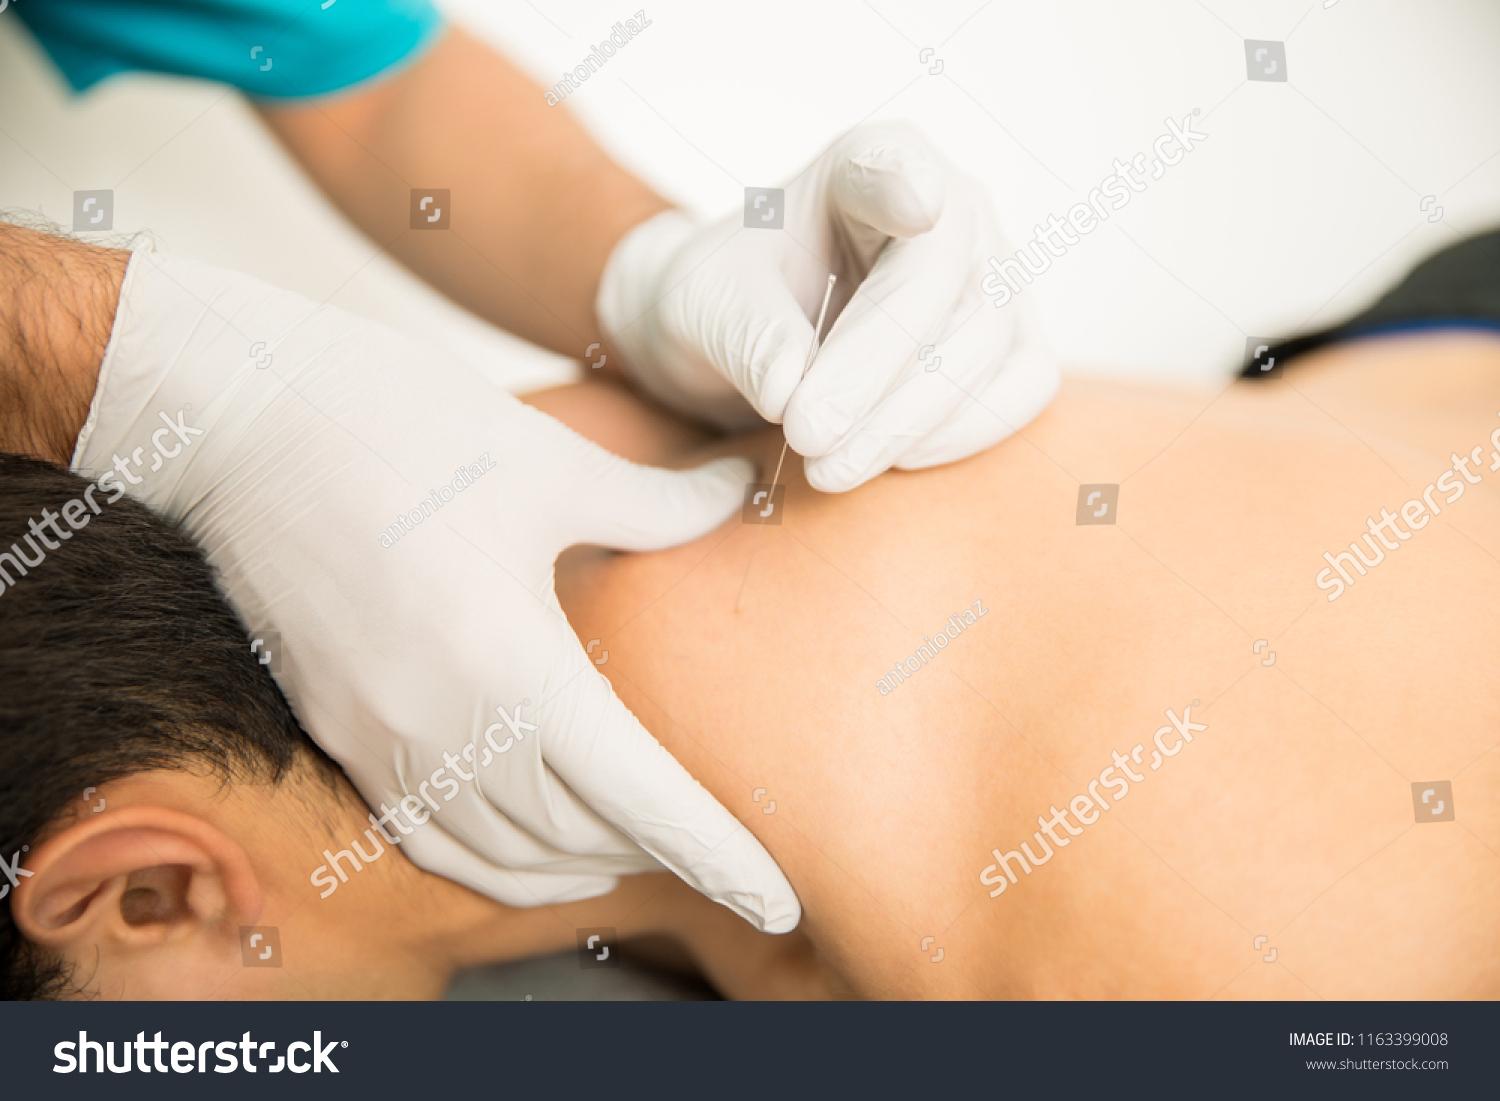 Closeup of shirtless man receiving dry needling therapy from doctor in clinic #1163399008